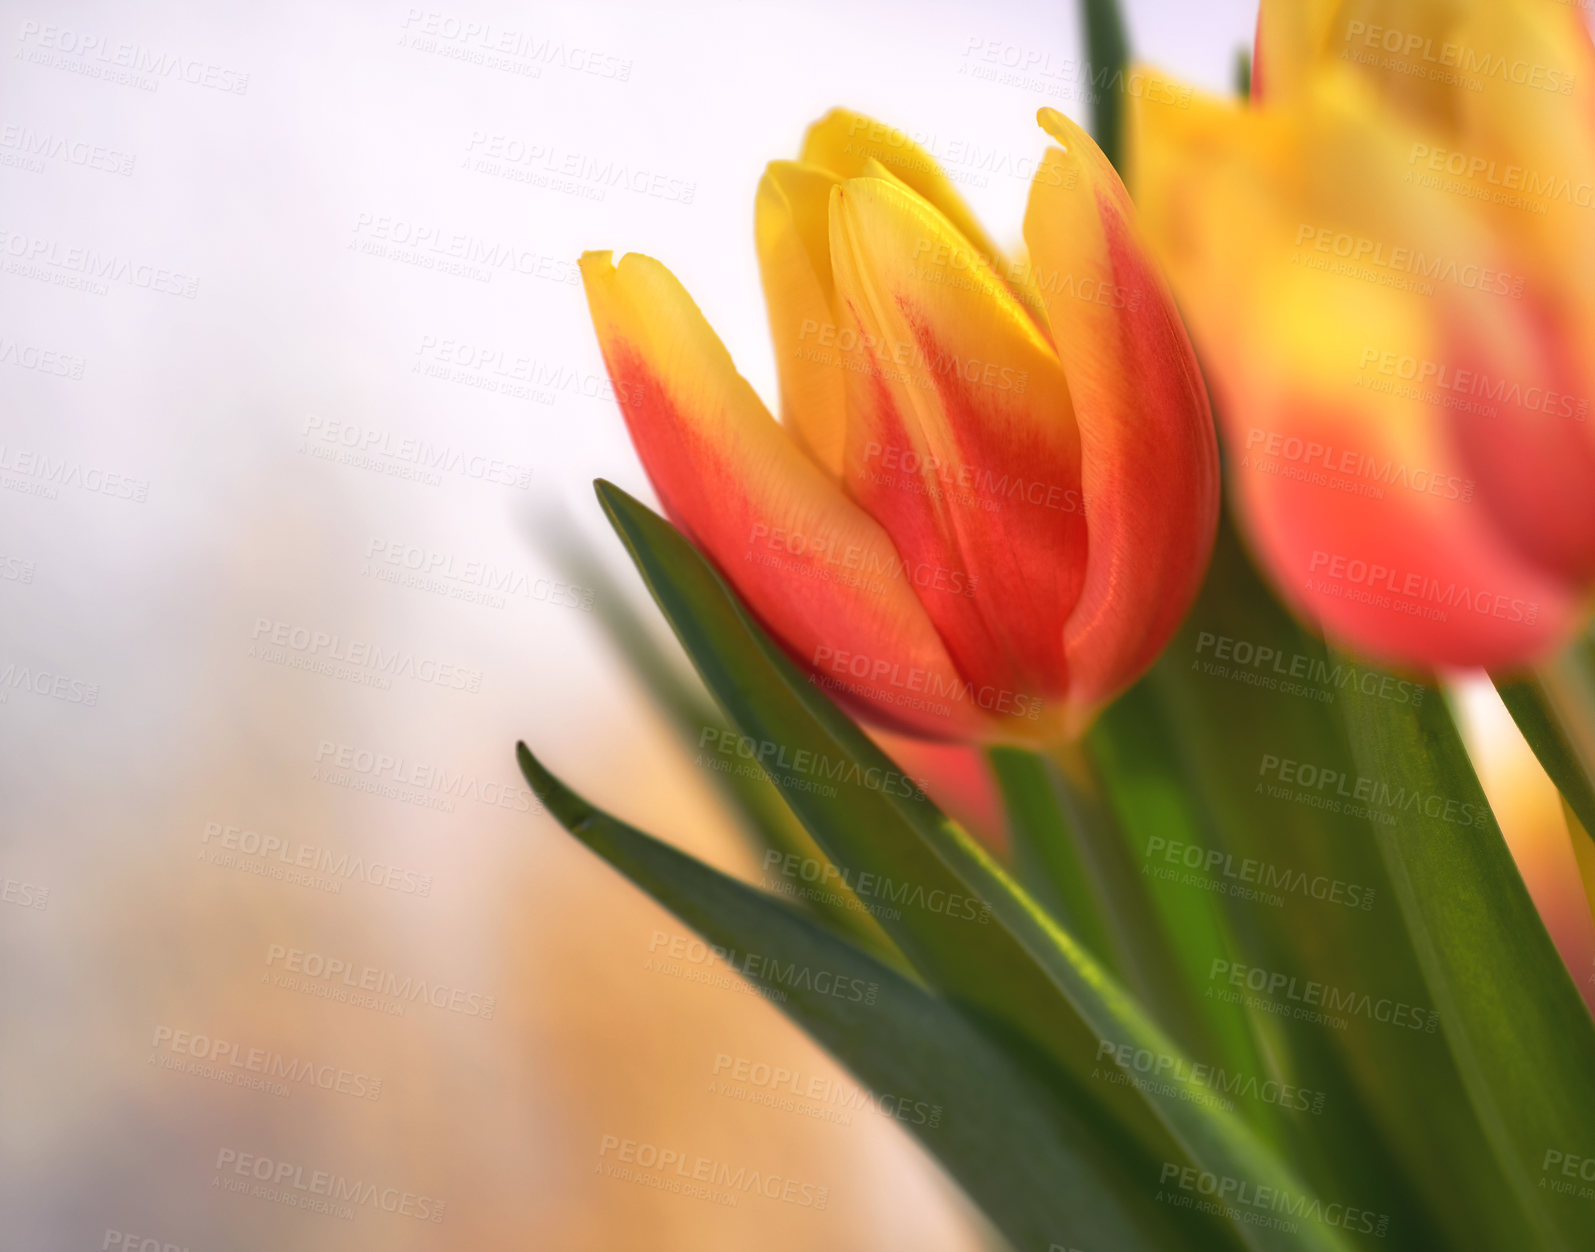 Buy stock photo Closeup of orange tulips on isolated background with copy space. A bouquet or bunch of beautiful tulip flowers with green stems grown as ornaments for its beauty and floral fragrance scent